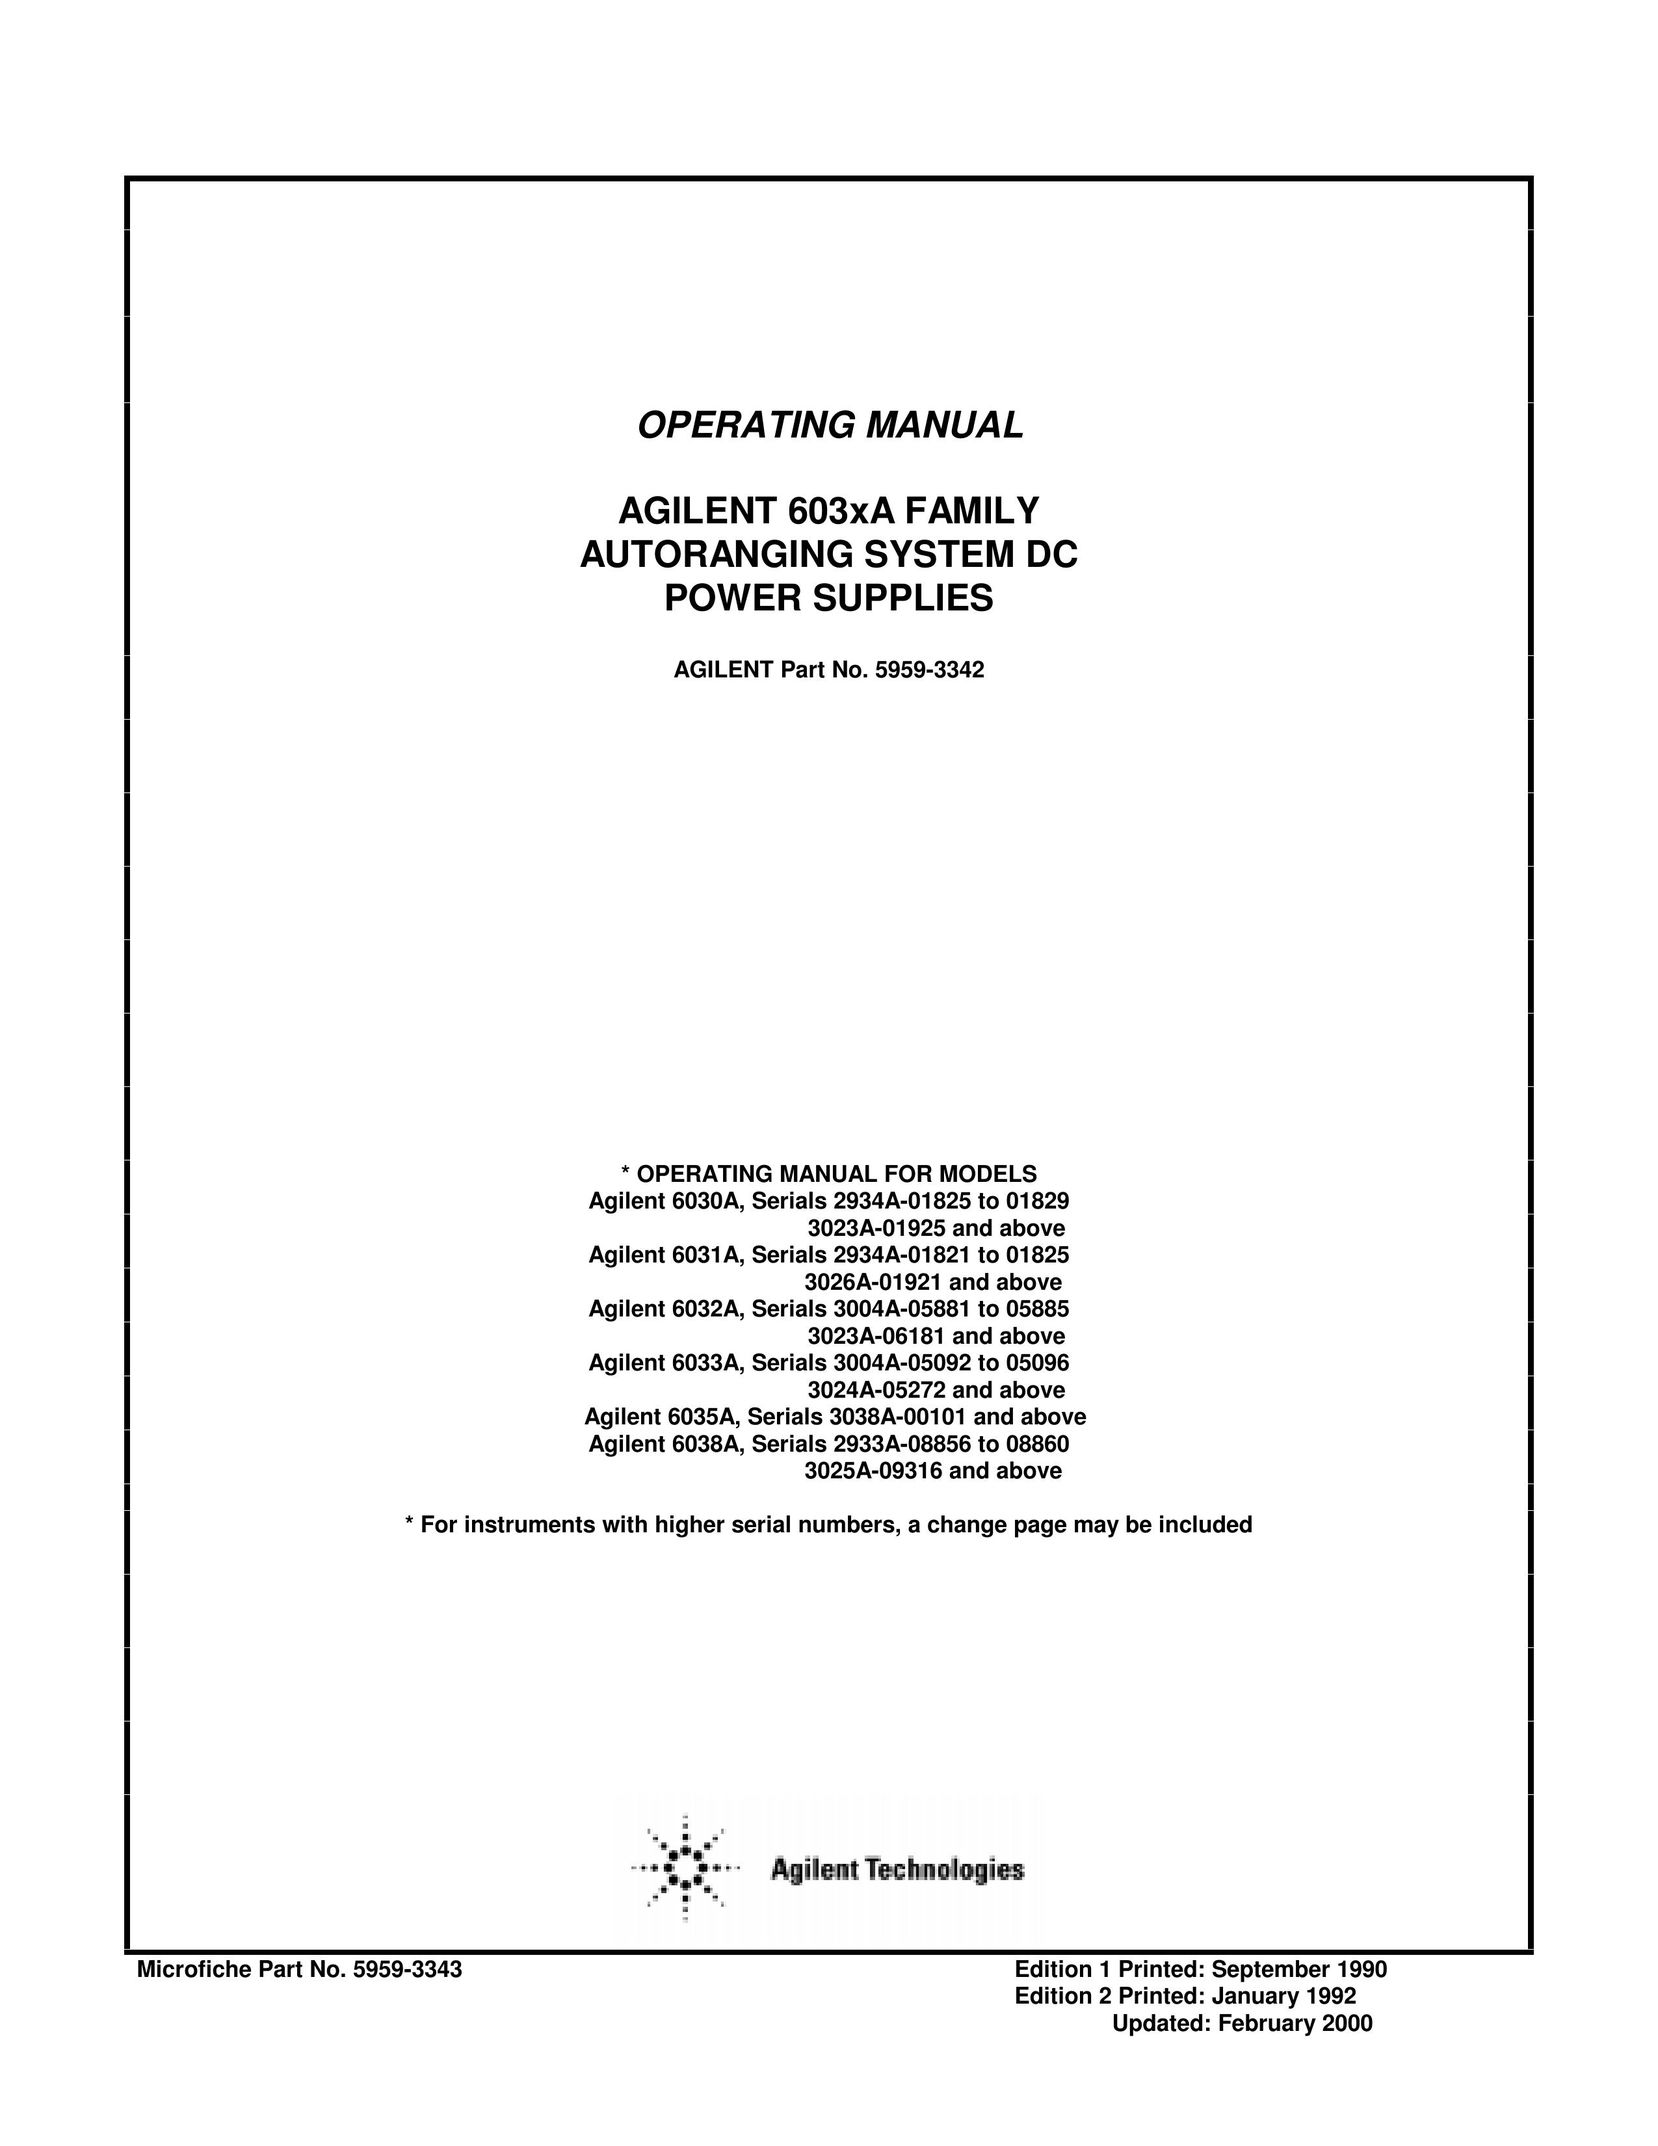 Agilent Technologies Serials 2934A-01825 to 01829 3023A-01925 Video Gaming Accessories User Manual